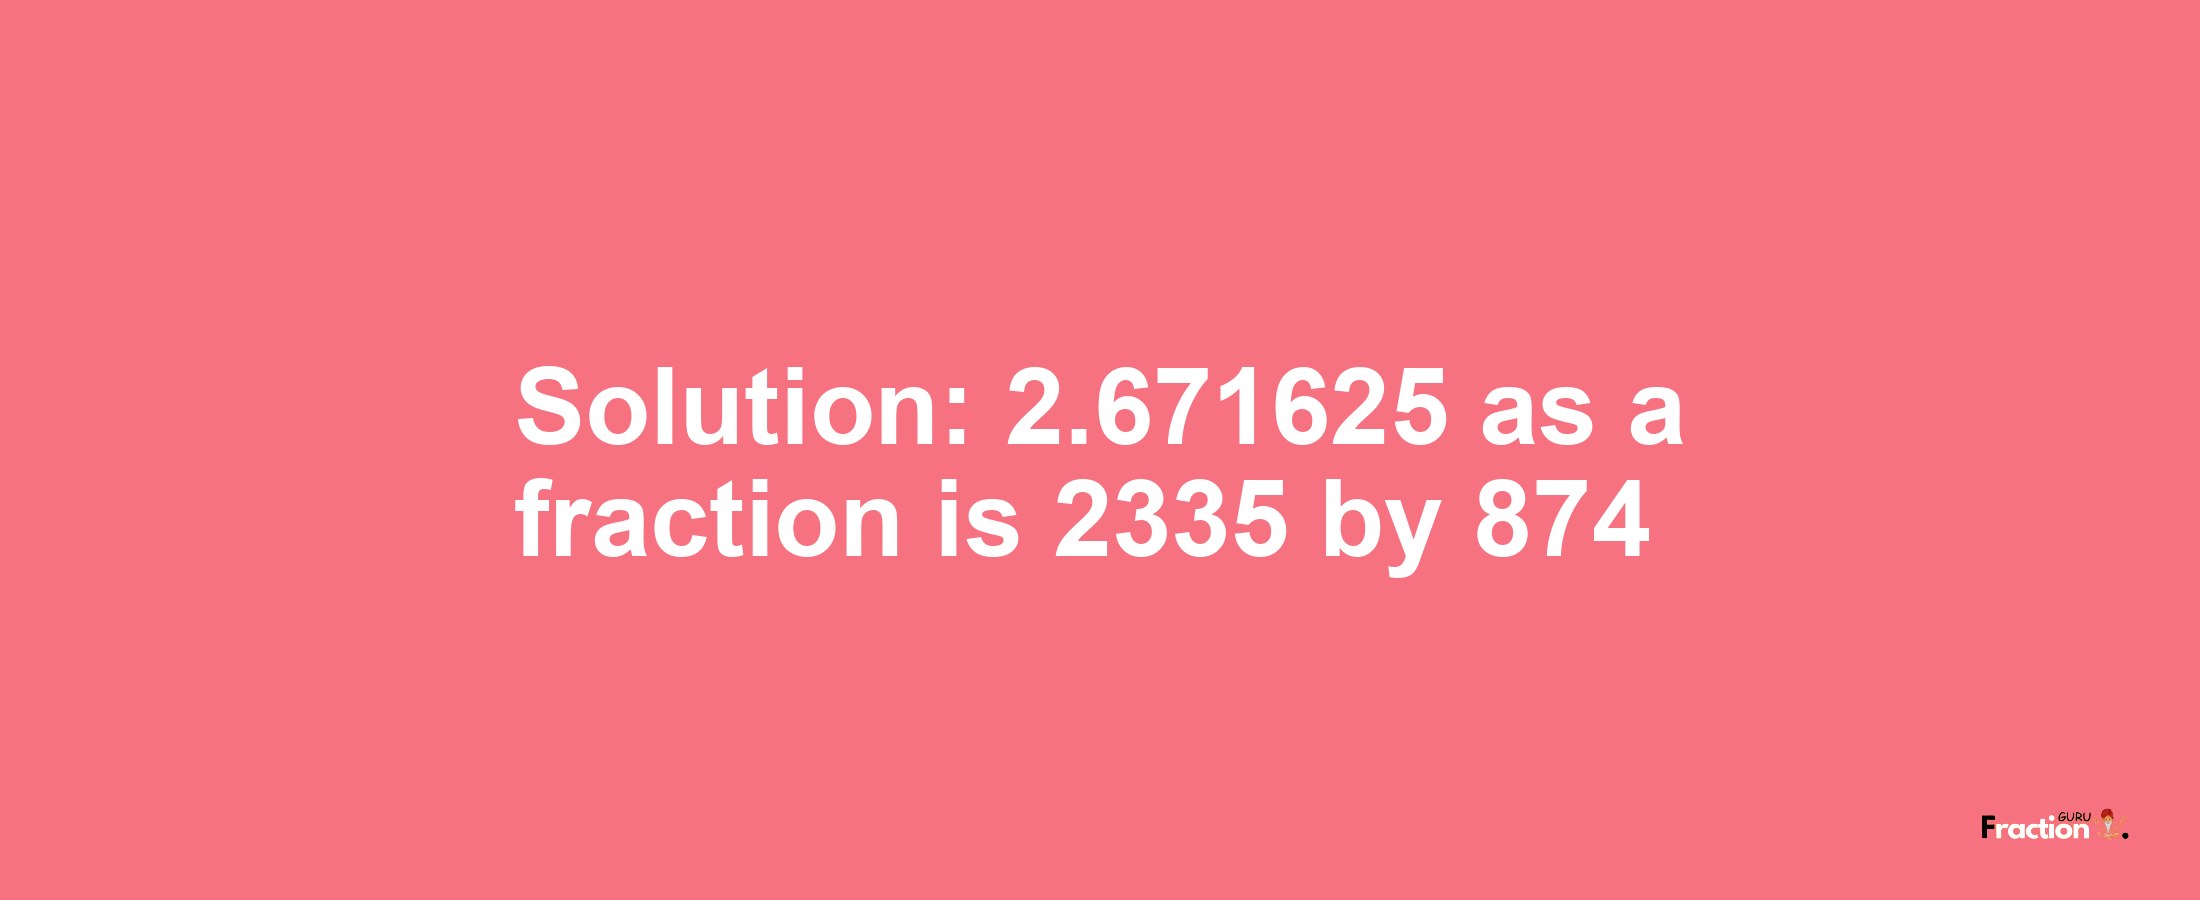 Solution:2.671625 as a fraction is 2335/874